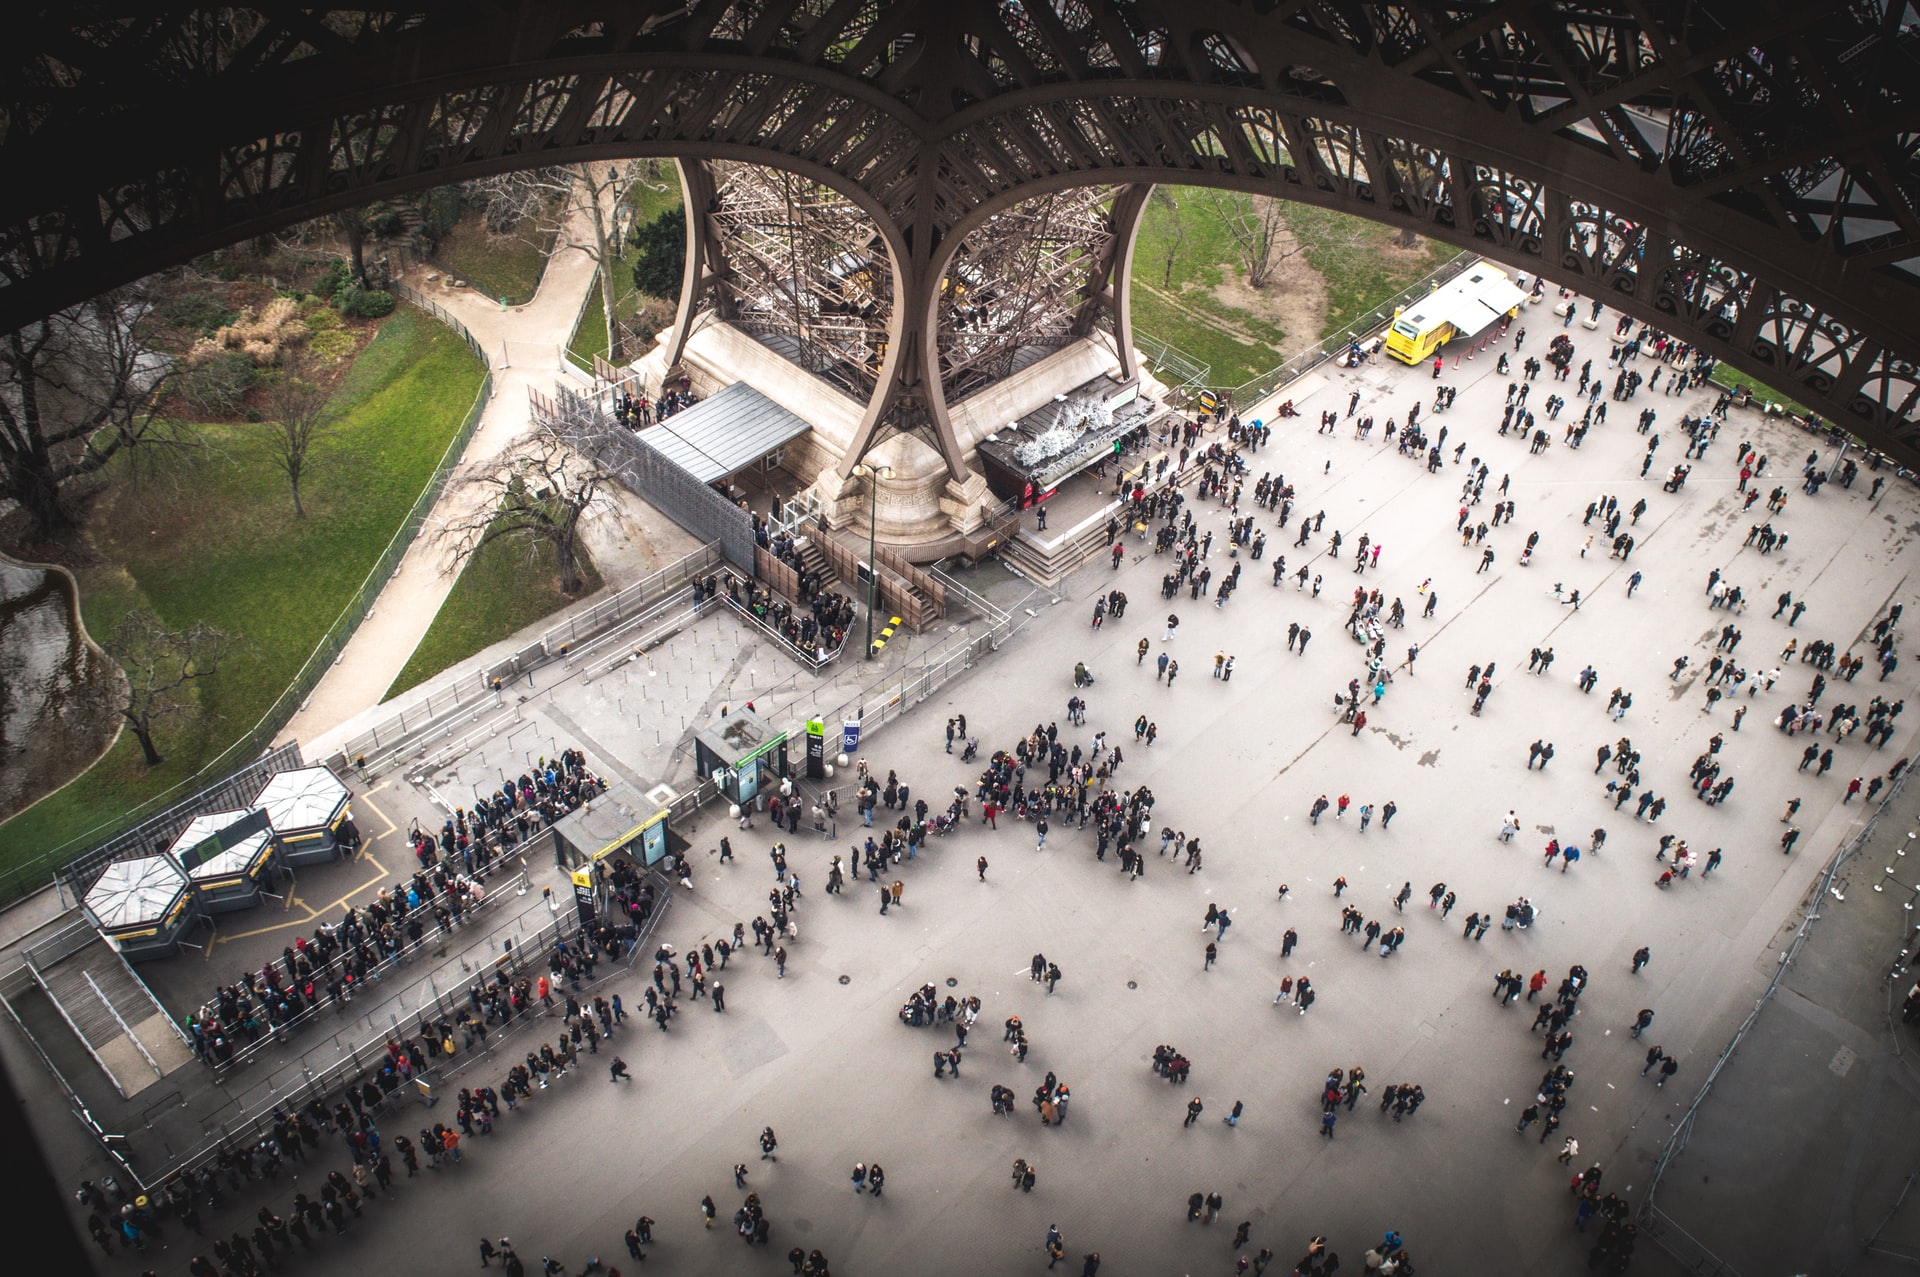 Eiffel Tower Viewing Deck Prices, Discounts, Hours & Guide